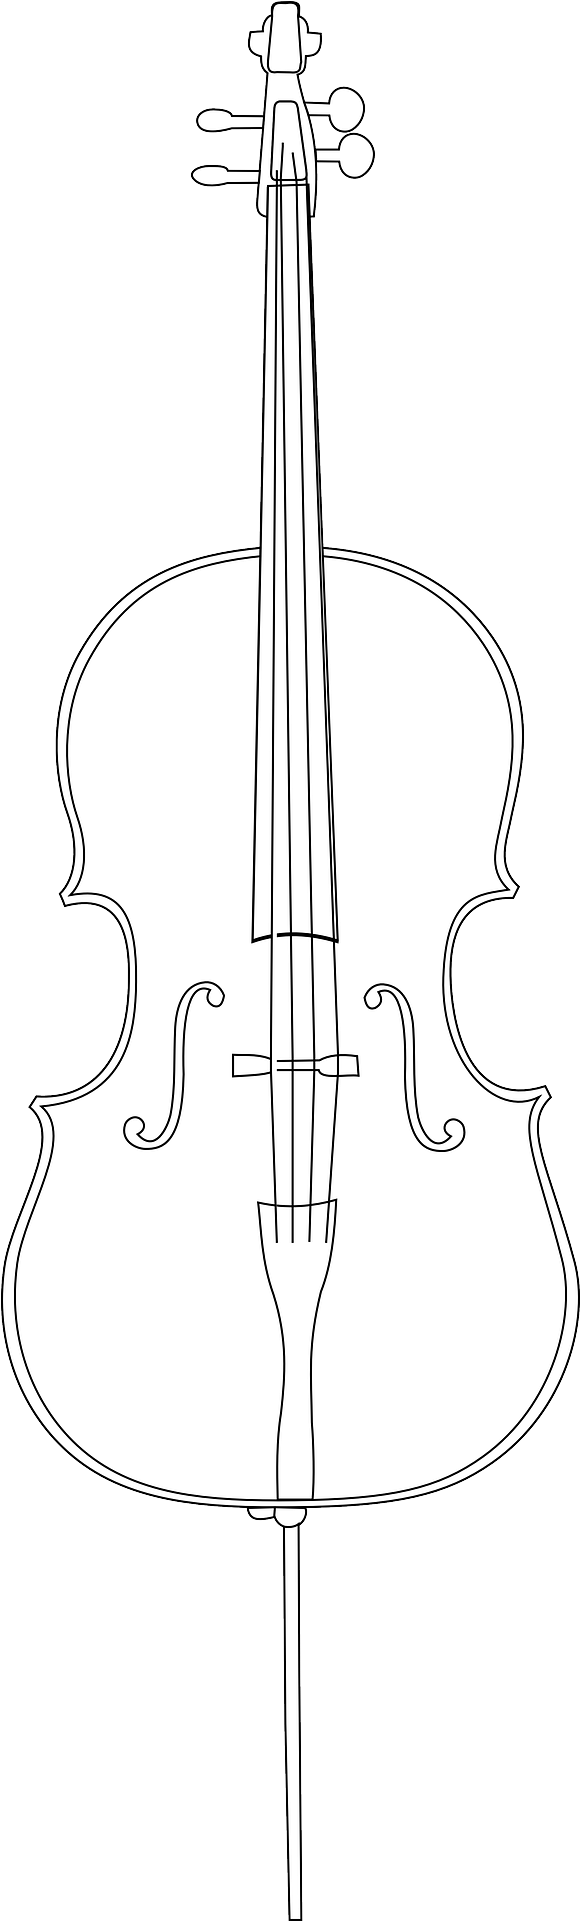 A Drawing Of A Cello